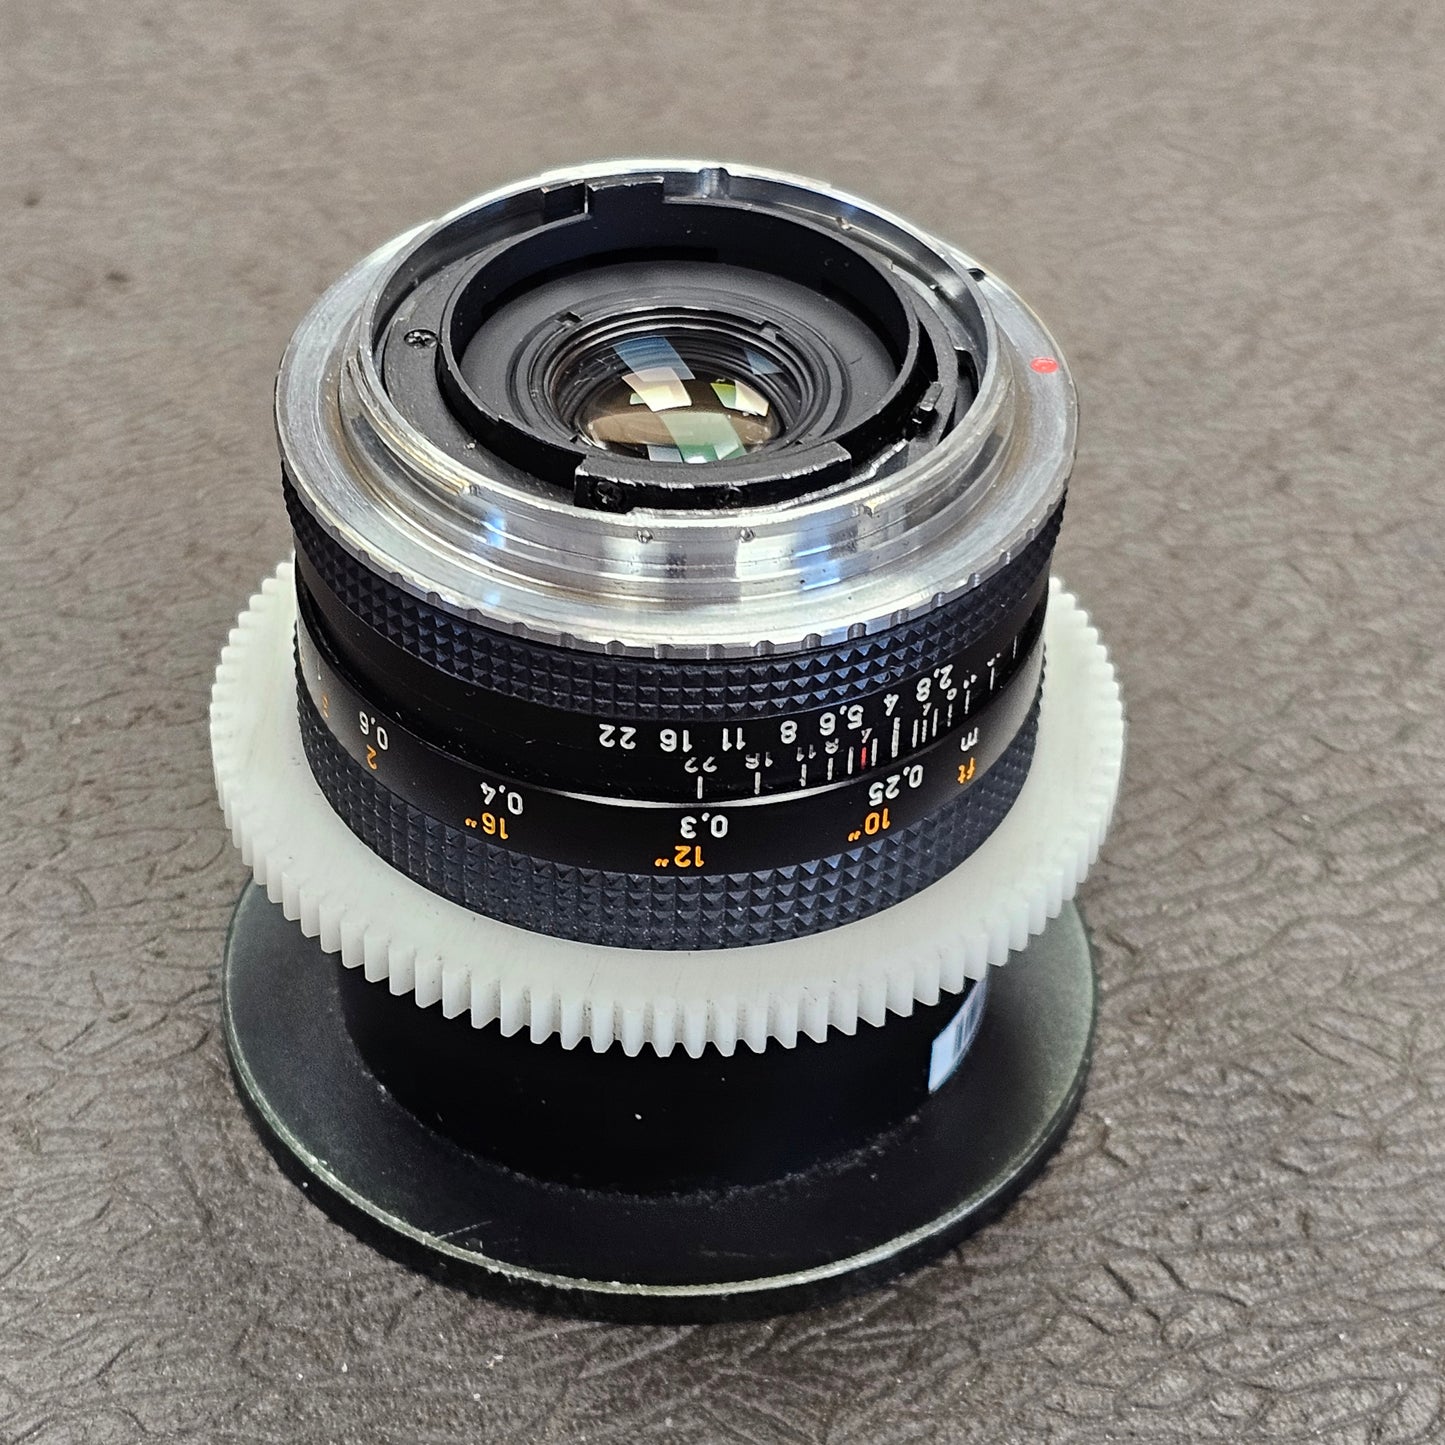 Zeiss Contax Distagon 25mm f2.8 T* Contax Mount Lens S# 6005239